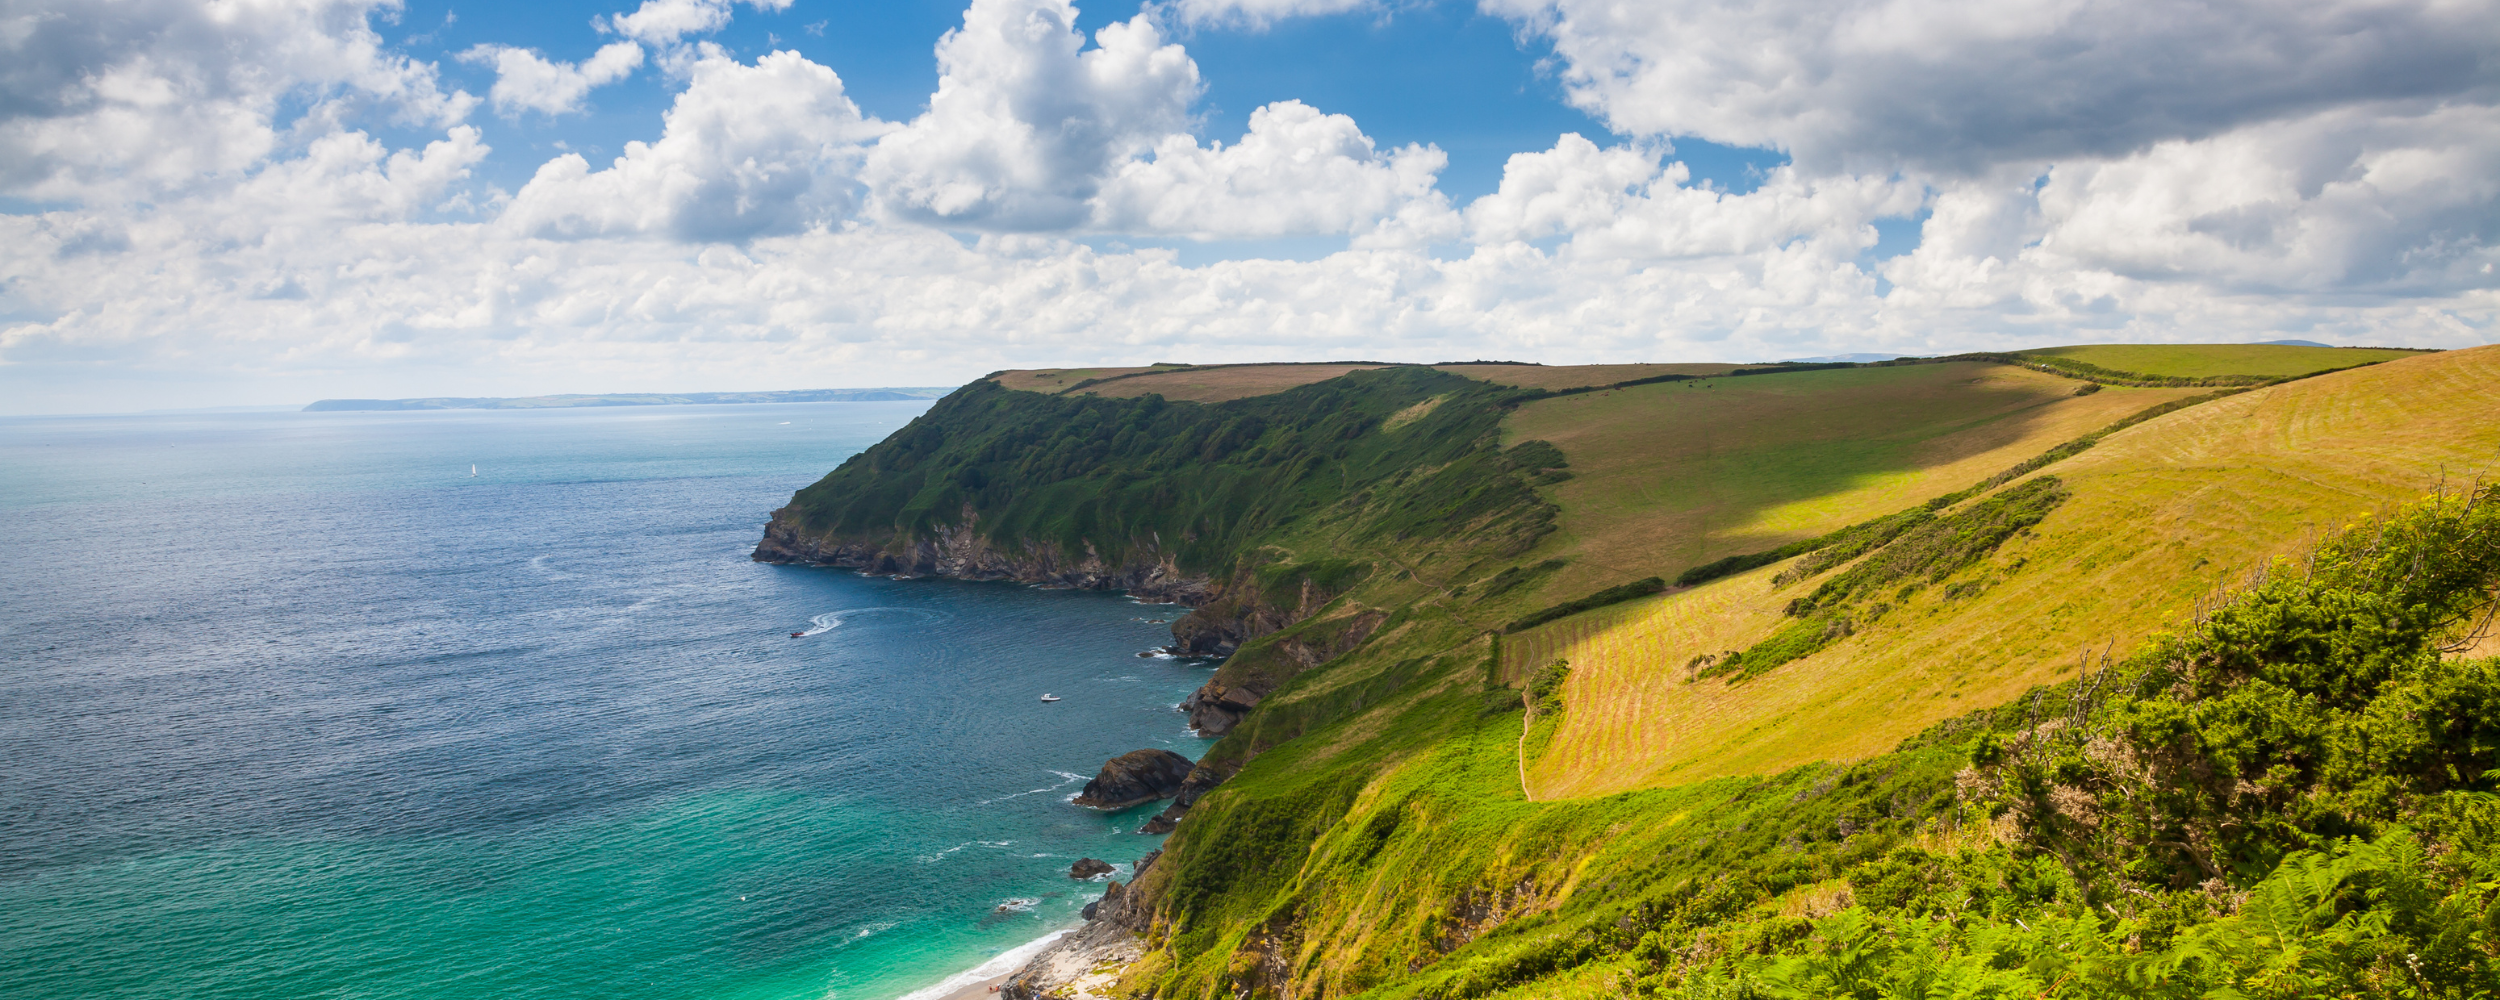 beautiful view of the lantic bay surrounded by majestic cliffs